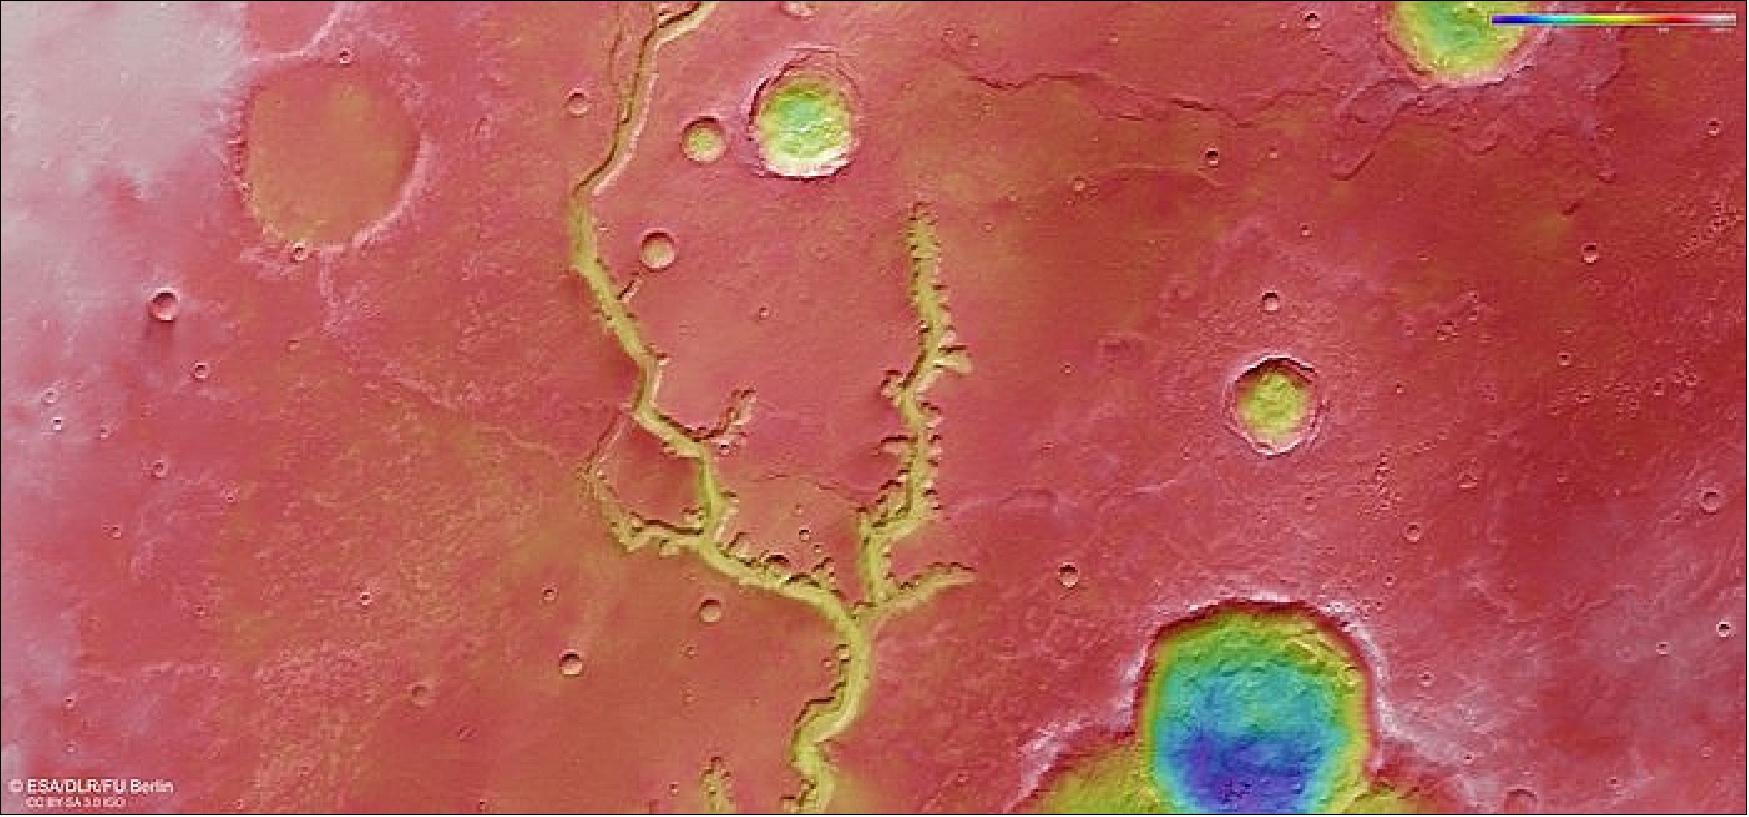 Figure 14: Topographic view of Nirgal Vallis. This color-coded topographic view shows a dried-up river valley on Mars named Nirgal Vallis. Lower parts of the surface are shown in blues and purples, while higher altitude regions show up in whites, yellows, and reds, as indicated on the scale to the top right. This view is based on a digital terrain model of the region, from which the topography of the landscape can be derived. It comprises data obtained by the High Resolution Stereo Camera on Mars Express on 16 November 2018 during orbit 18818. The ground resolution is approximately 14 m/pixel and the images are centered at about 315ºE/27ºS. North is to the right (image credit: ESA/DLR/FU Berlin, CC BY-SA 3.0 IGO)